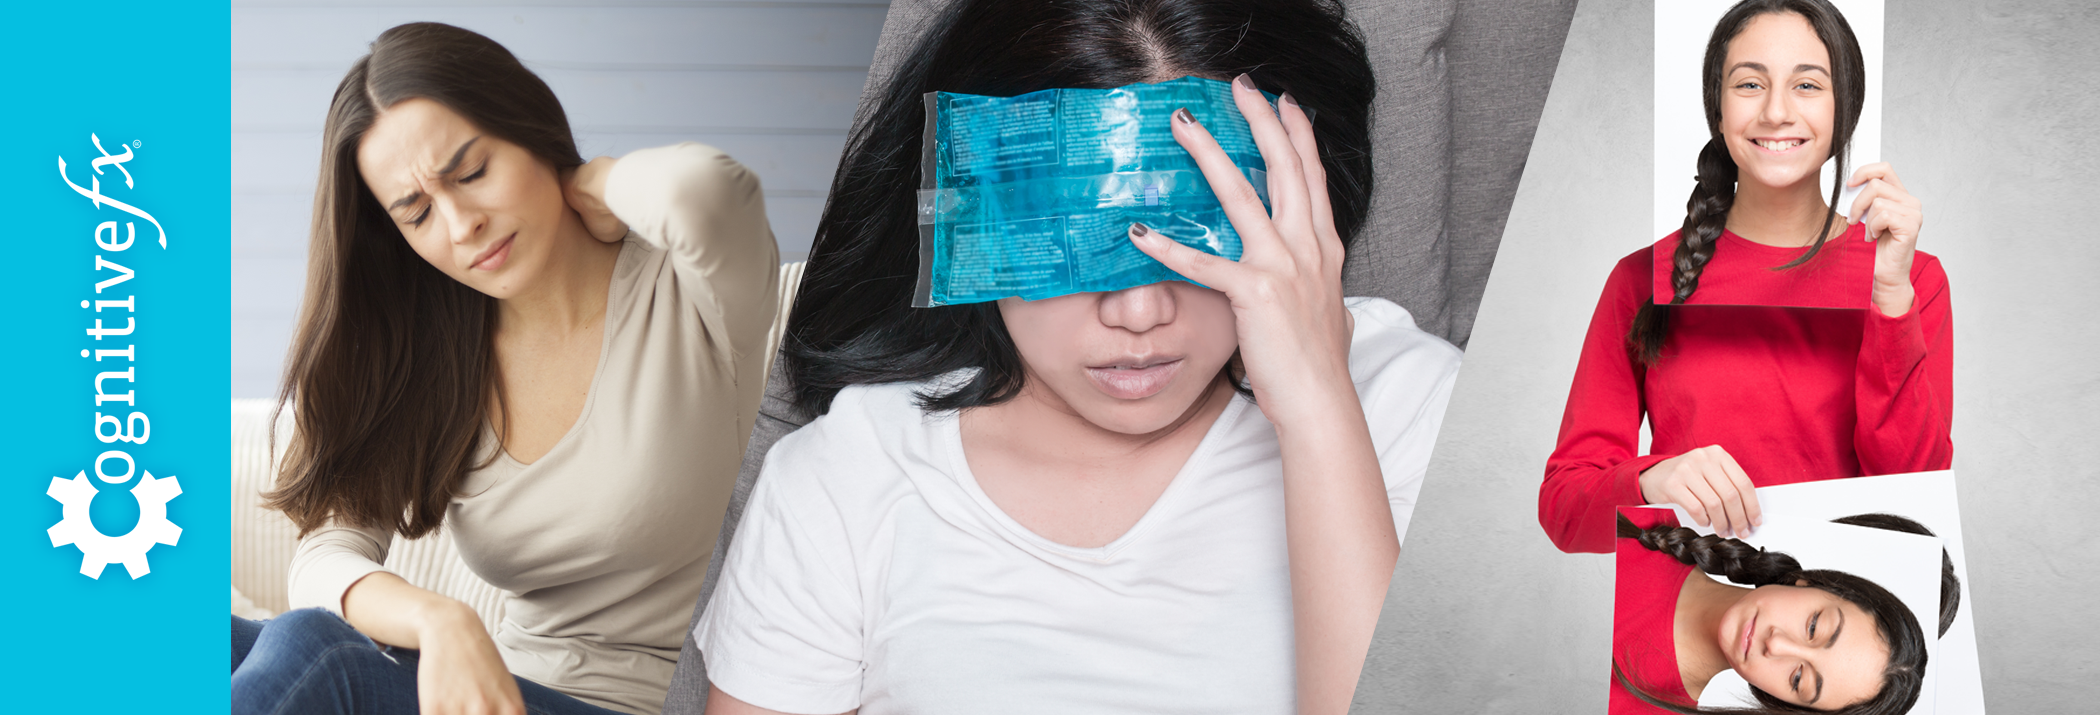 A Complete Guide to Post-Concussion Syndrome